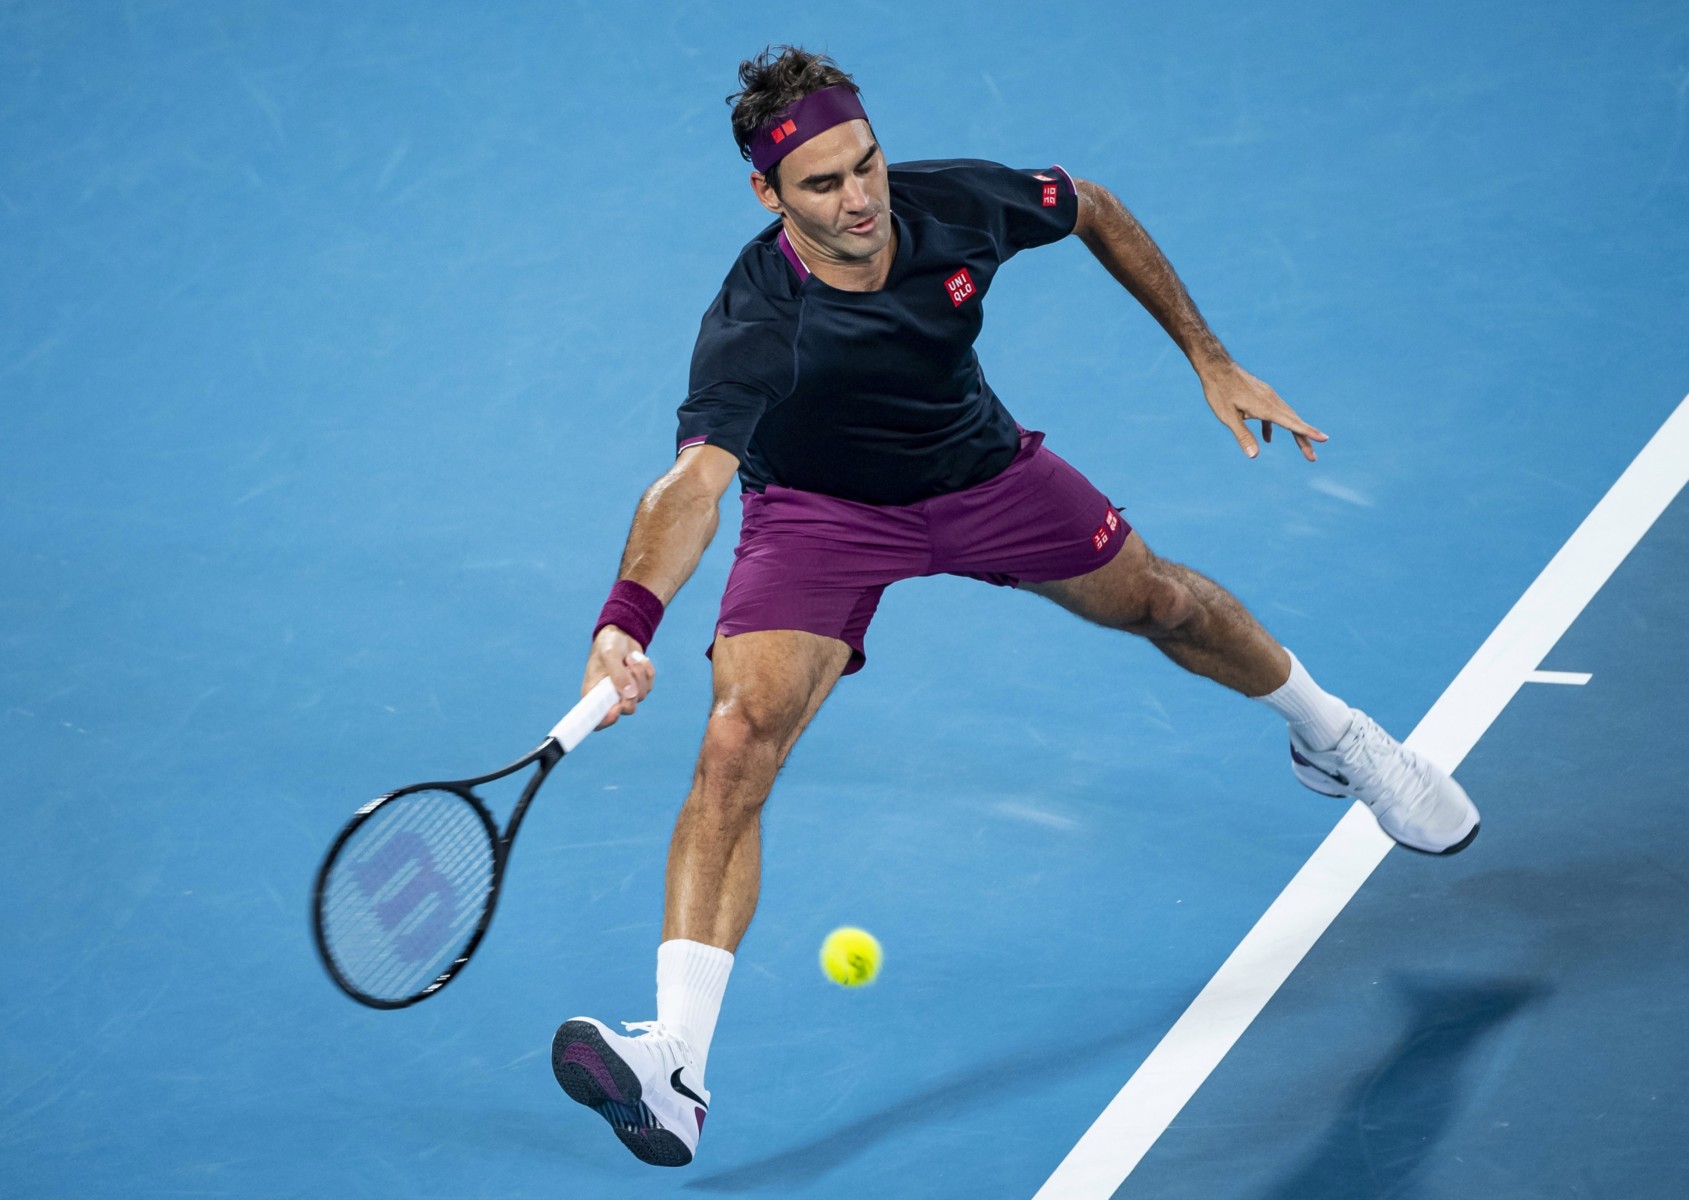 , Roger Federer making ‘great’ progress after undergoing serious knee surgery in February, says coach Ljubicic